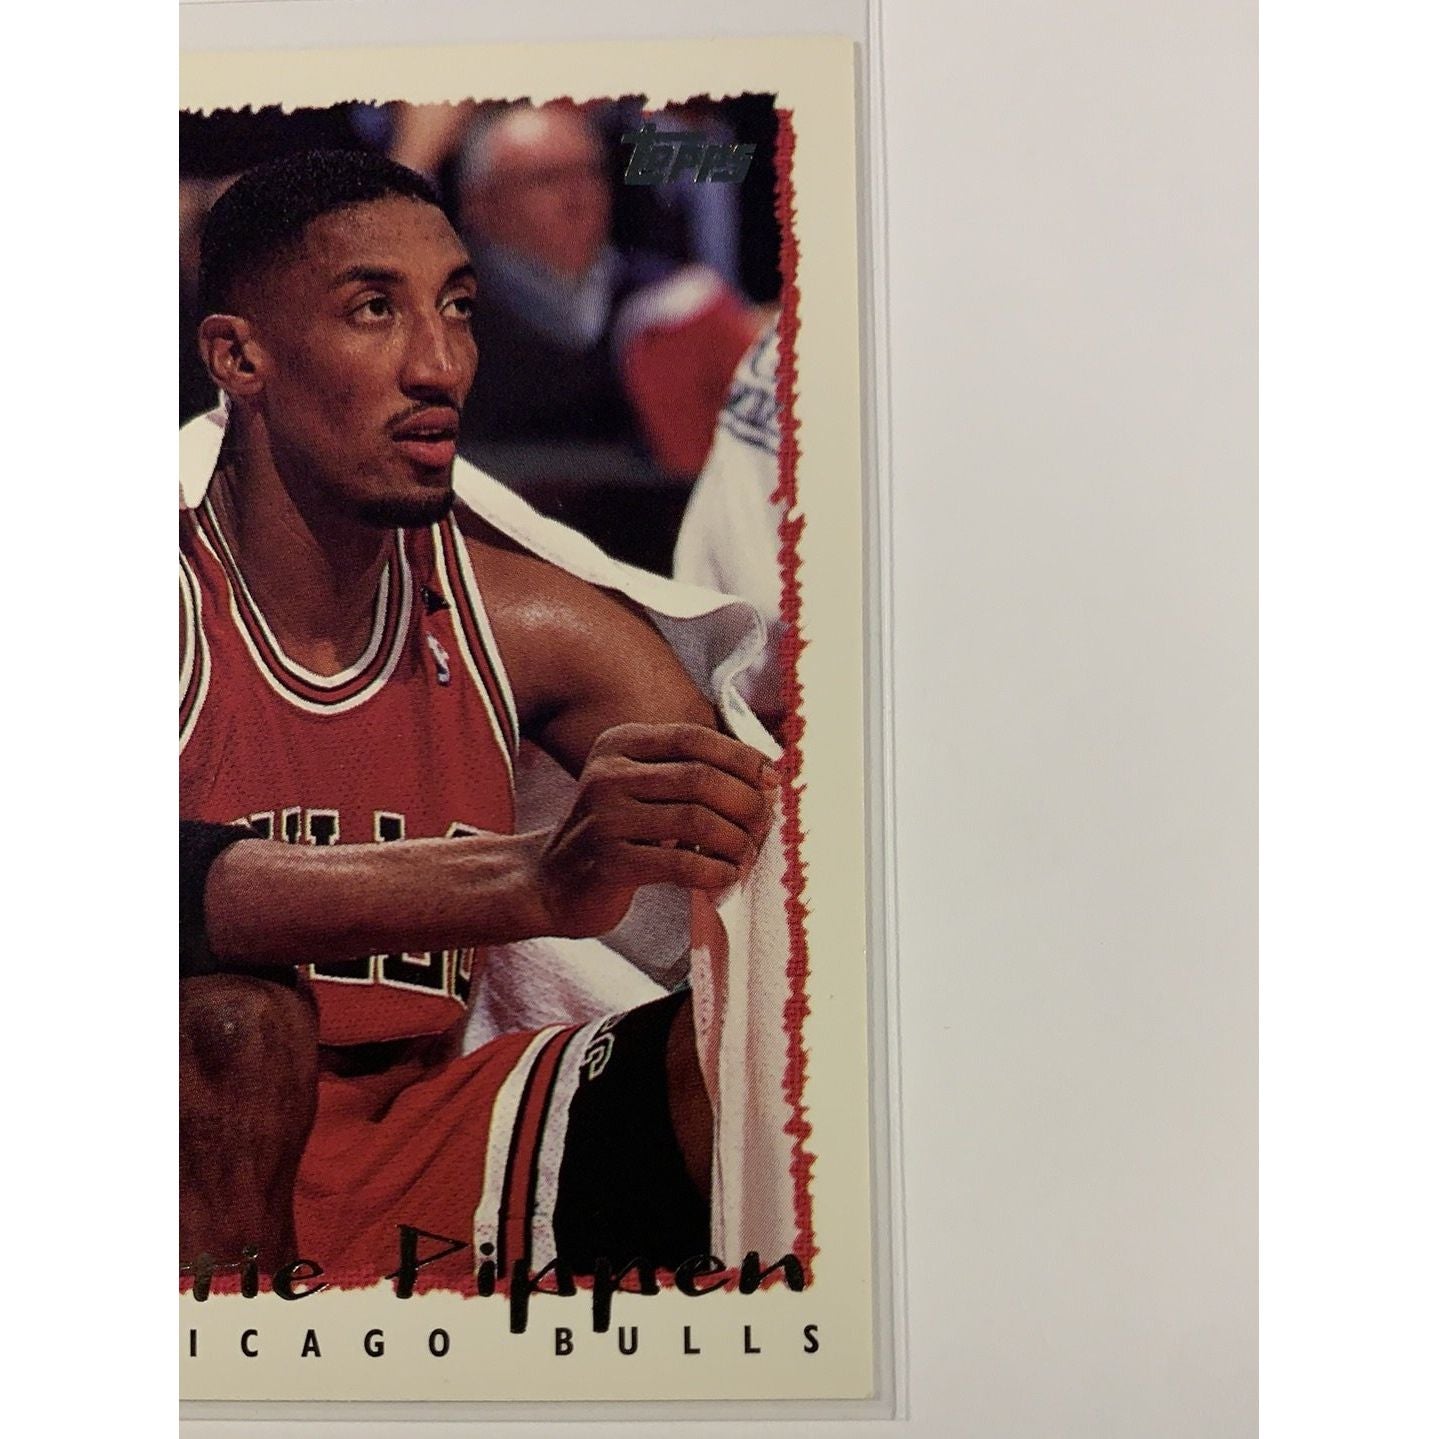  1994-95 Topps Scottie Pippen Base #29  Local Legends Cards & Collectibles